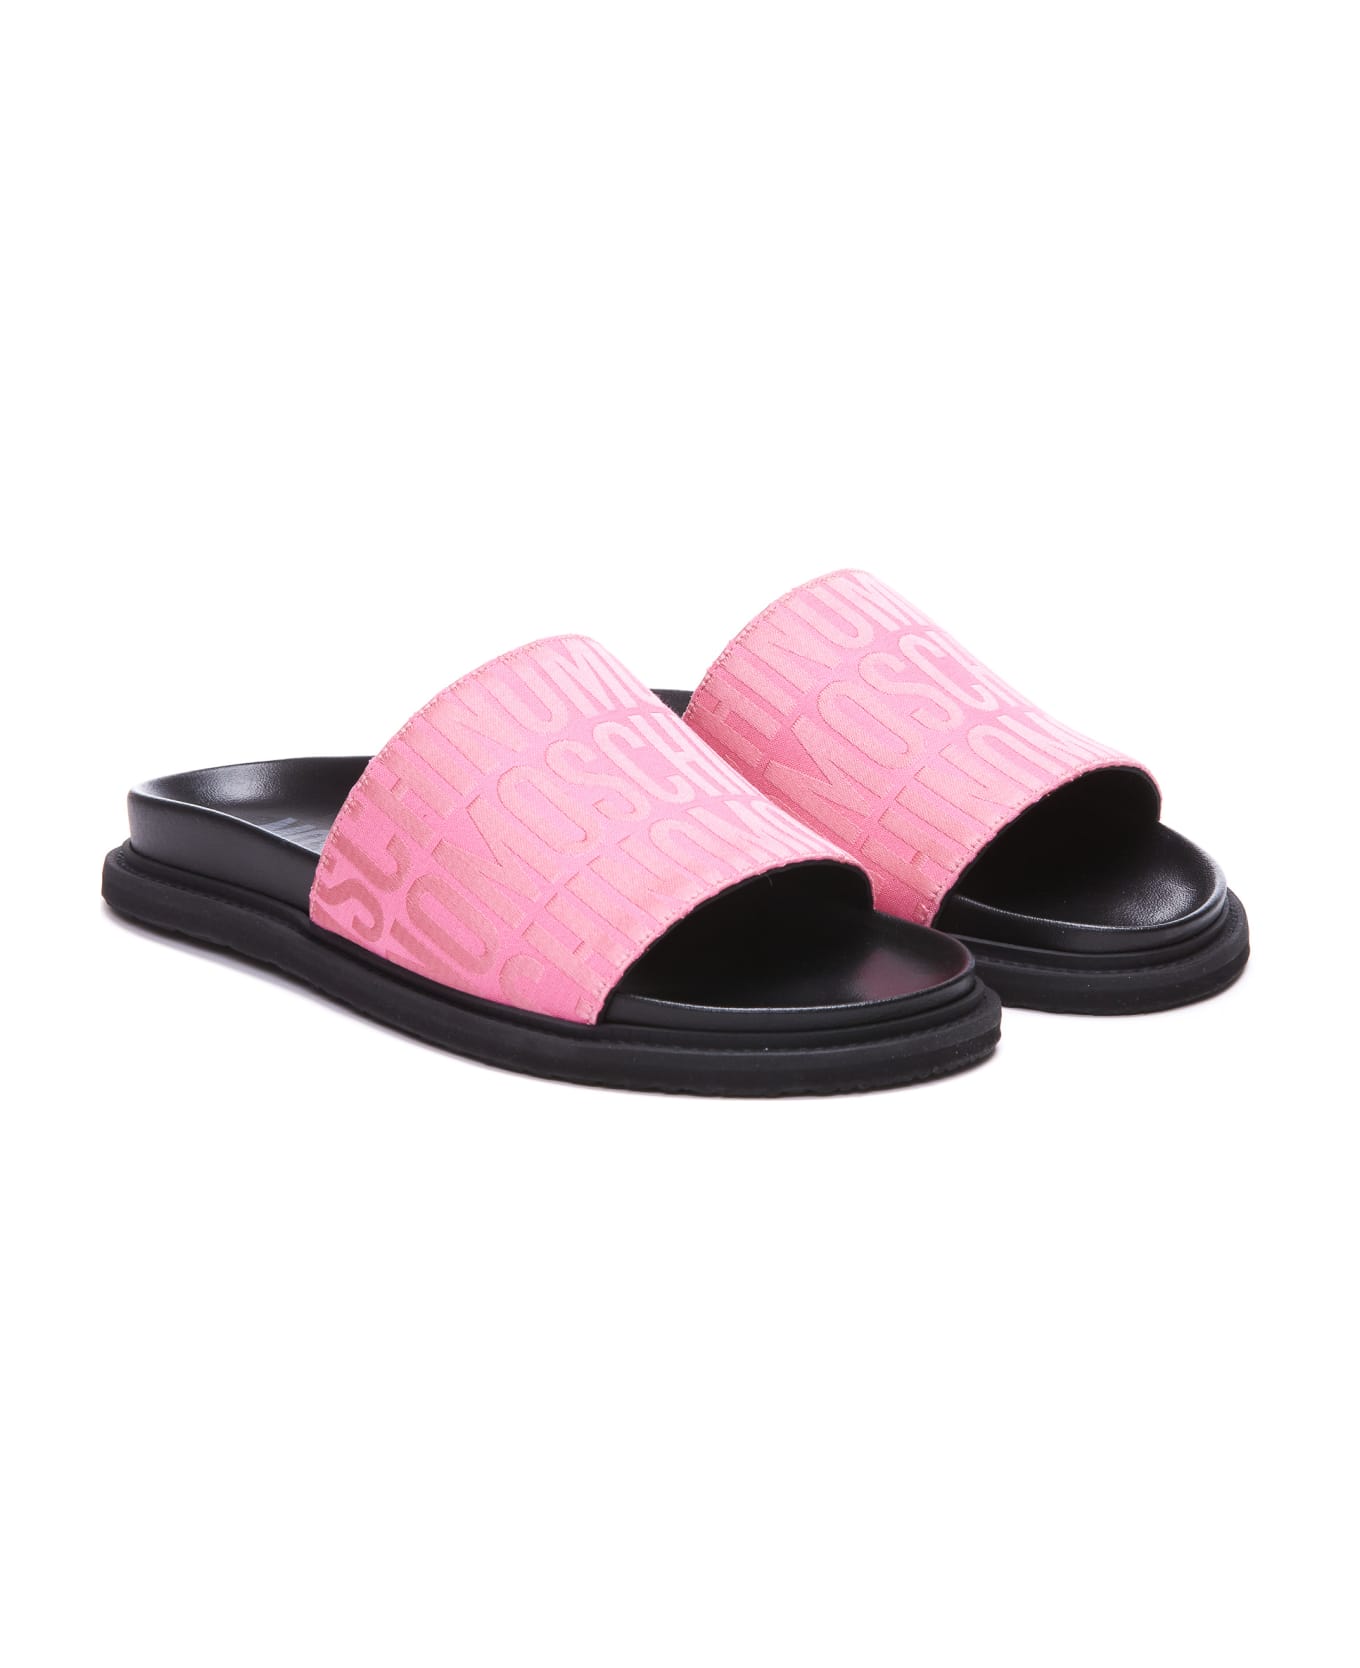 Moschino Logo Collection Slide Sandals - Pink